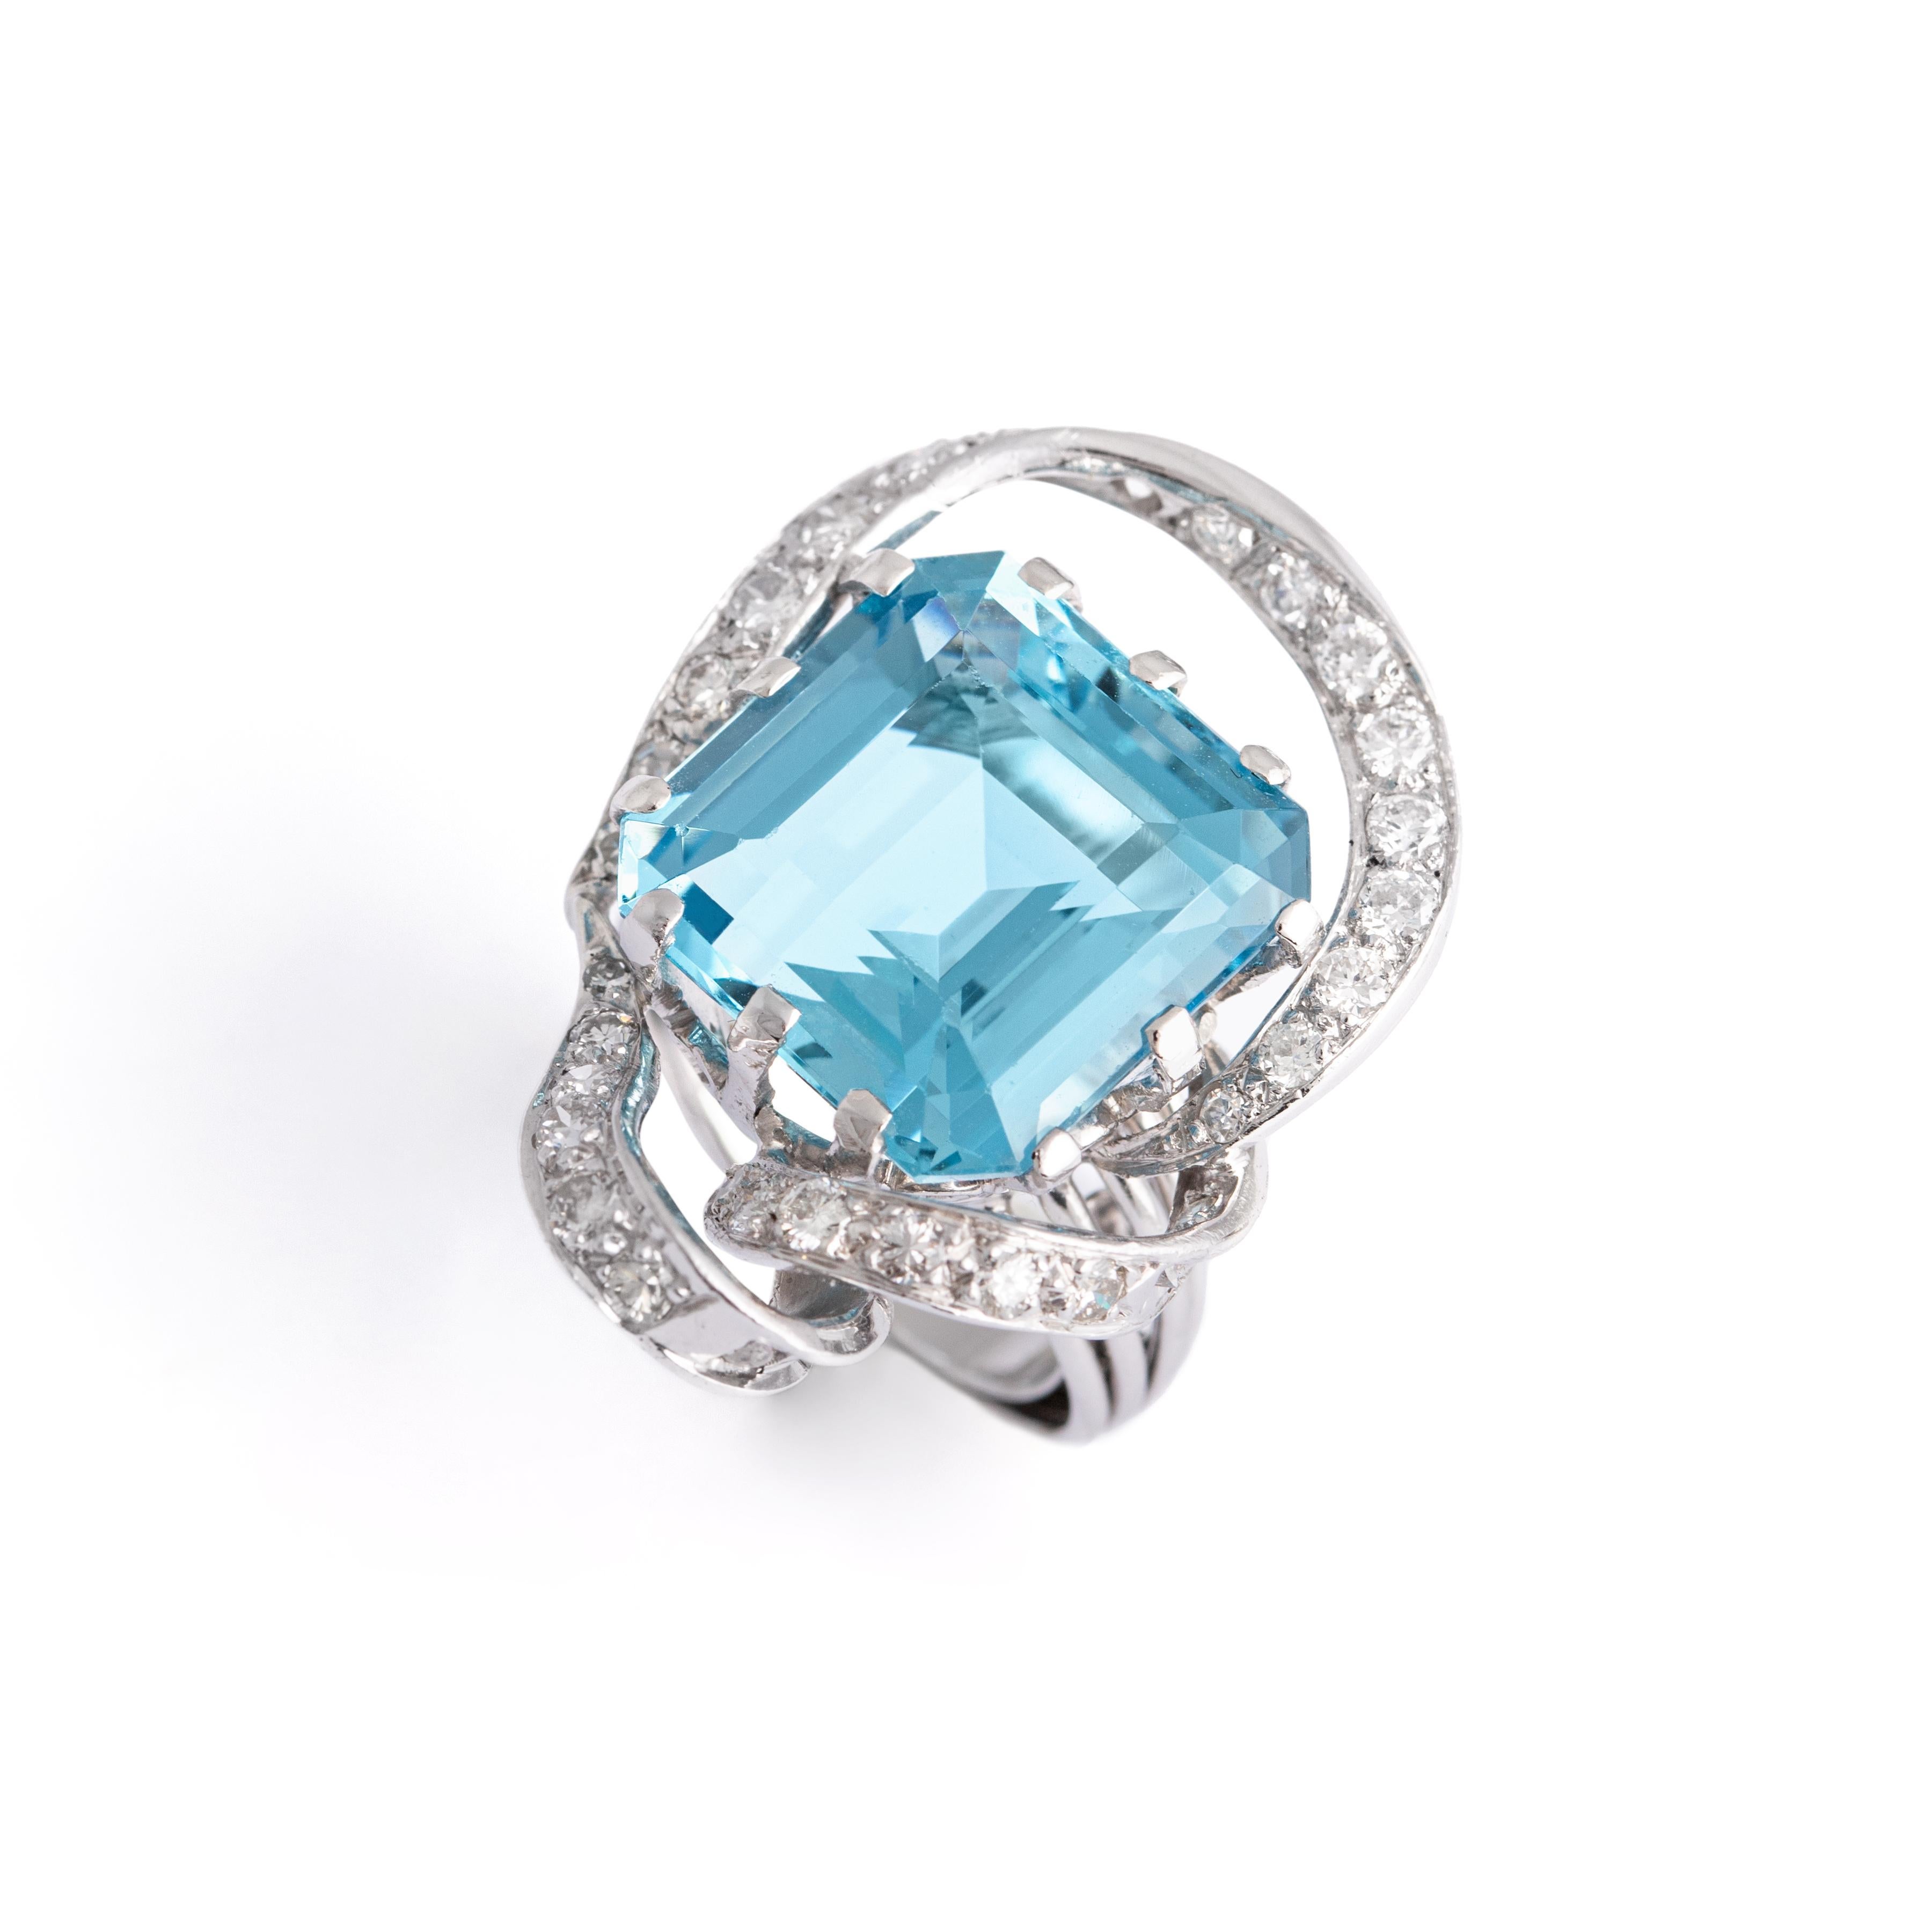 Exquisite Aquamarine square step cut ring, a true embodiment of elegance and sophistication. Crafted with meticulous attention to detail, this stunning piece features a mesmerizing Aquamarine gemstone, estimated to weigh approximately 11.00